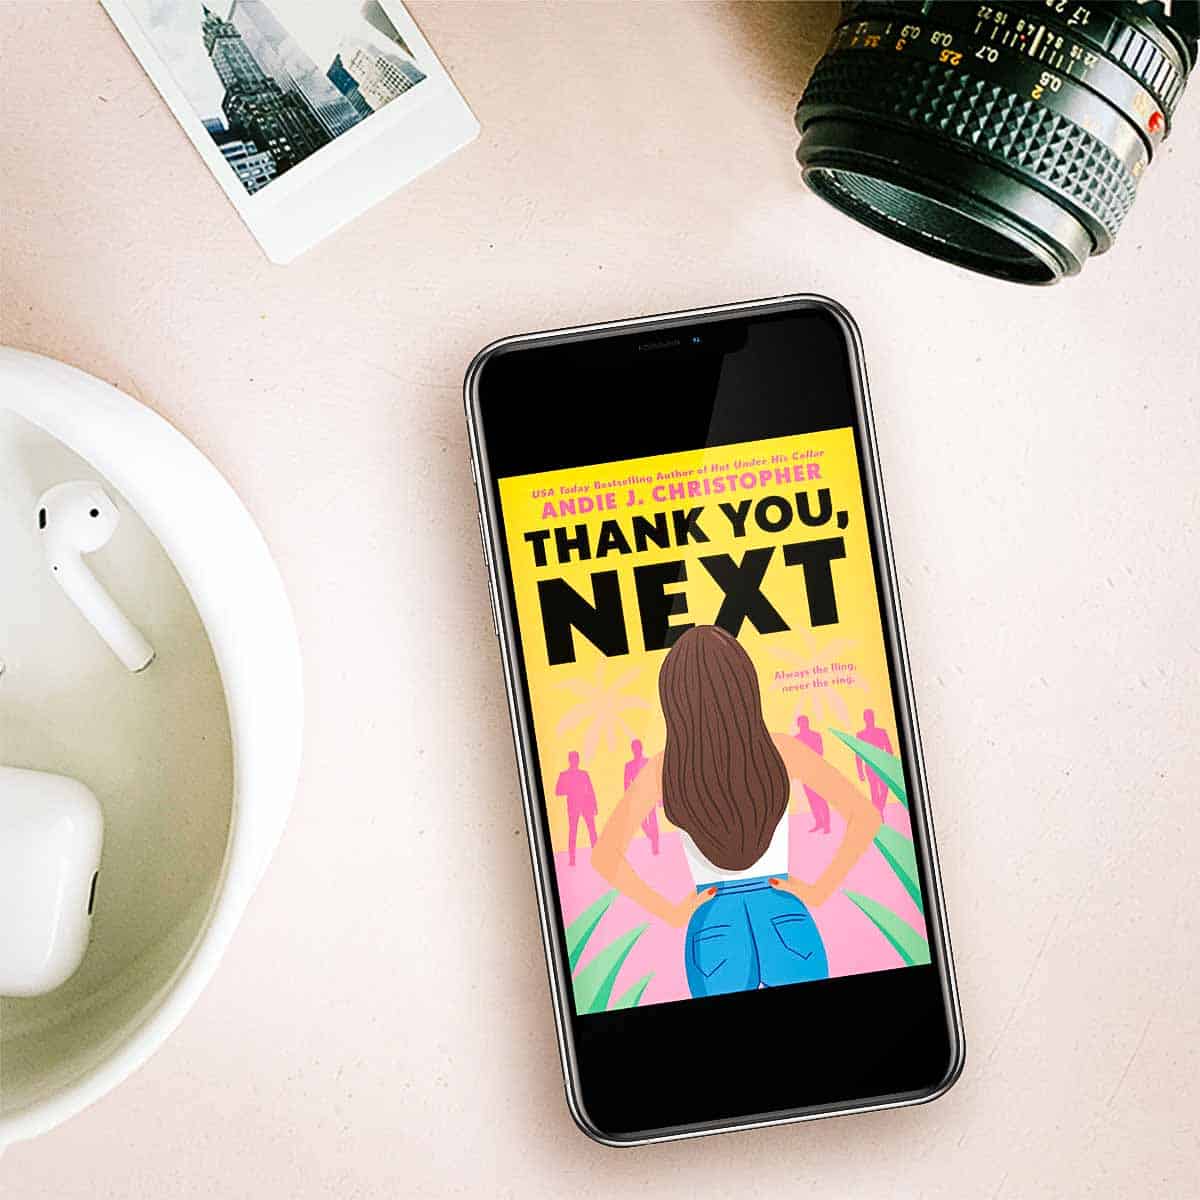 Get a Sneak Peek Inside Thank You Next by Andie J. Christopher!